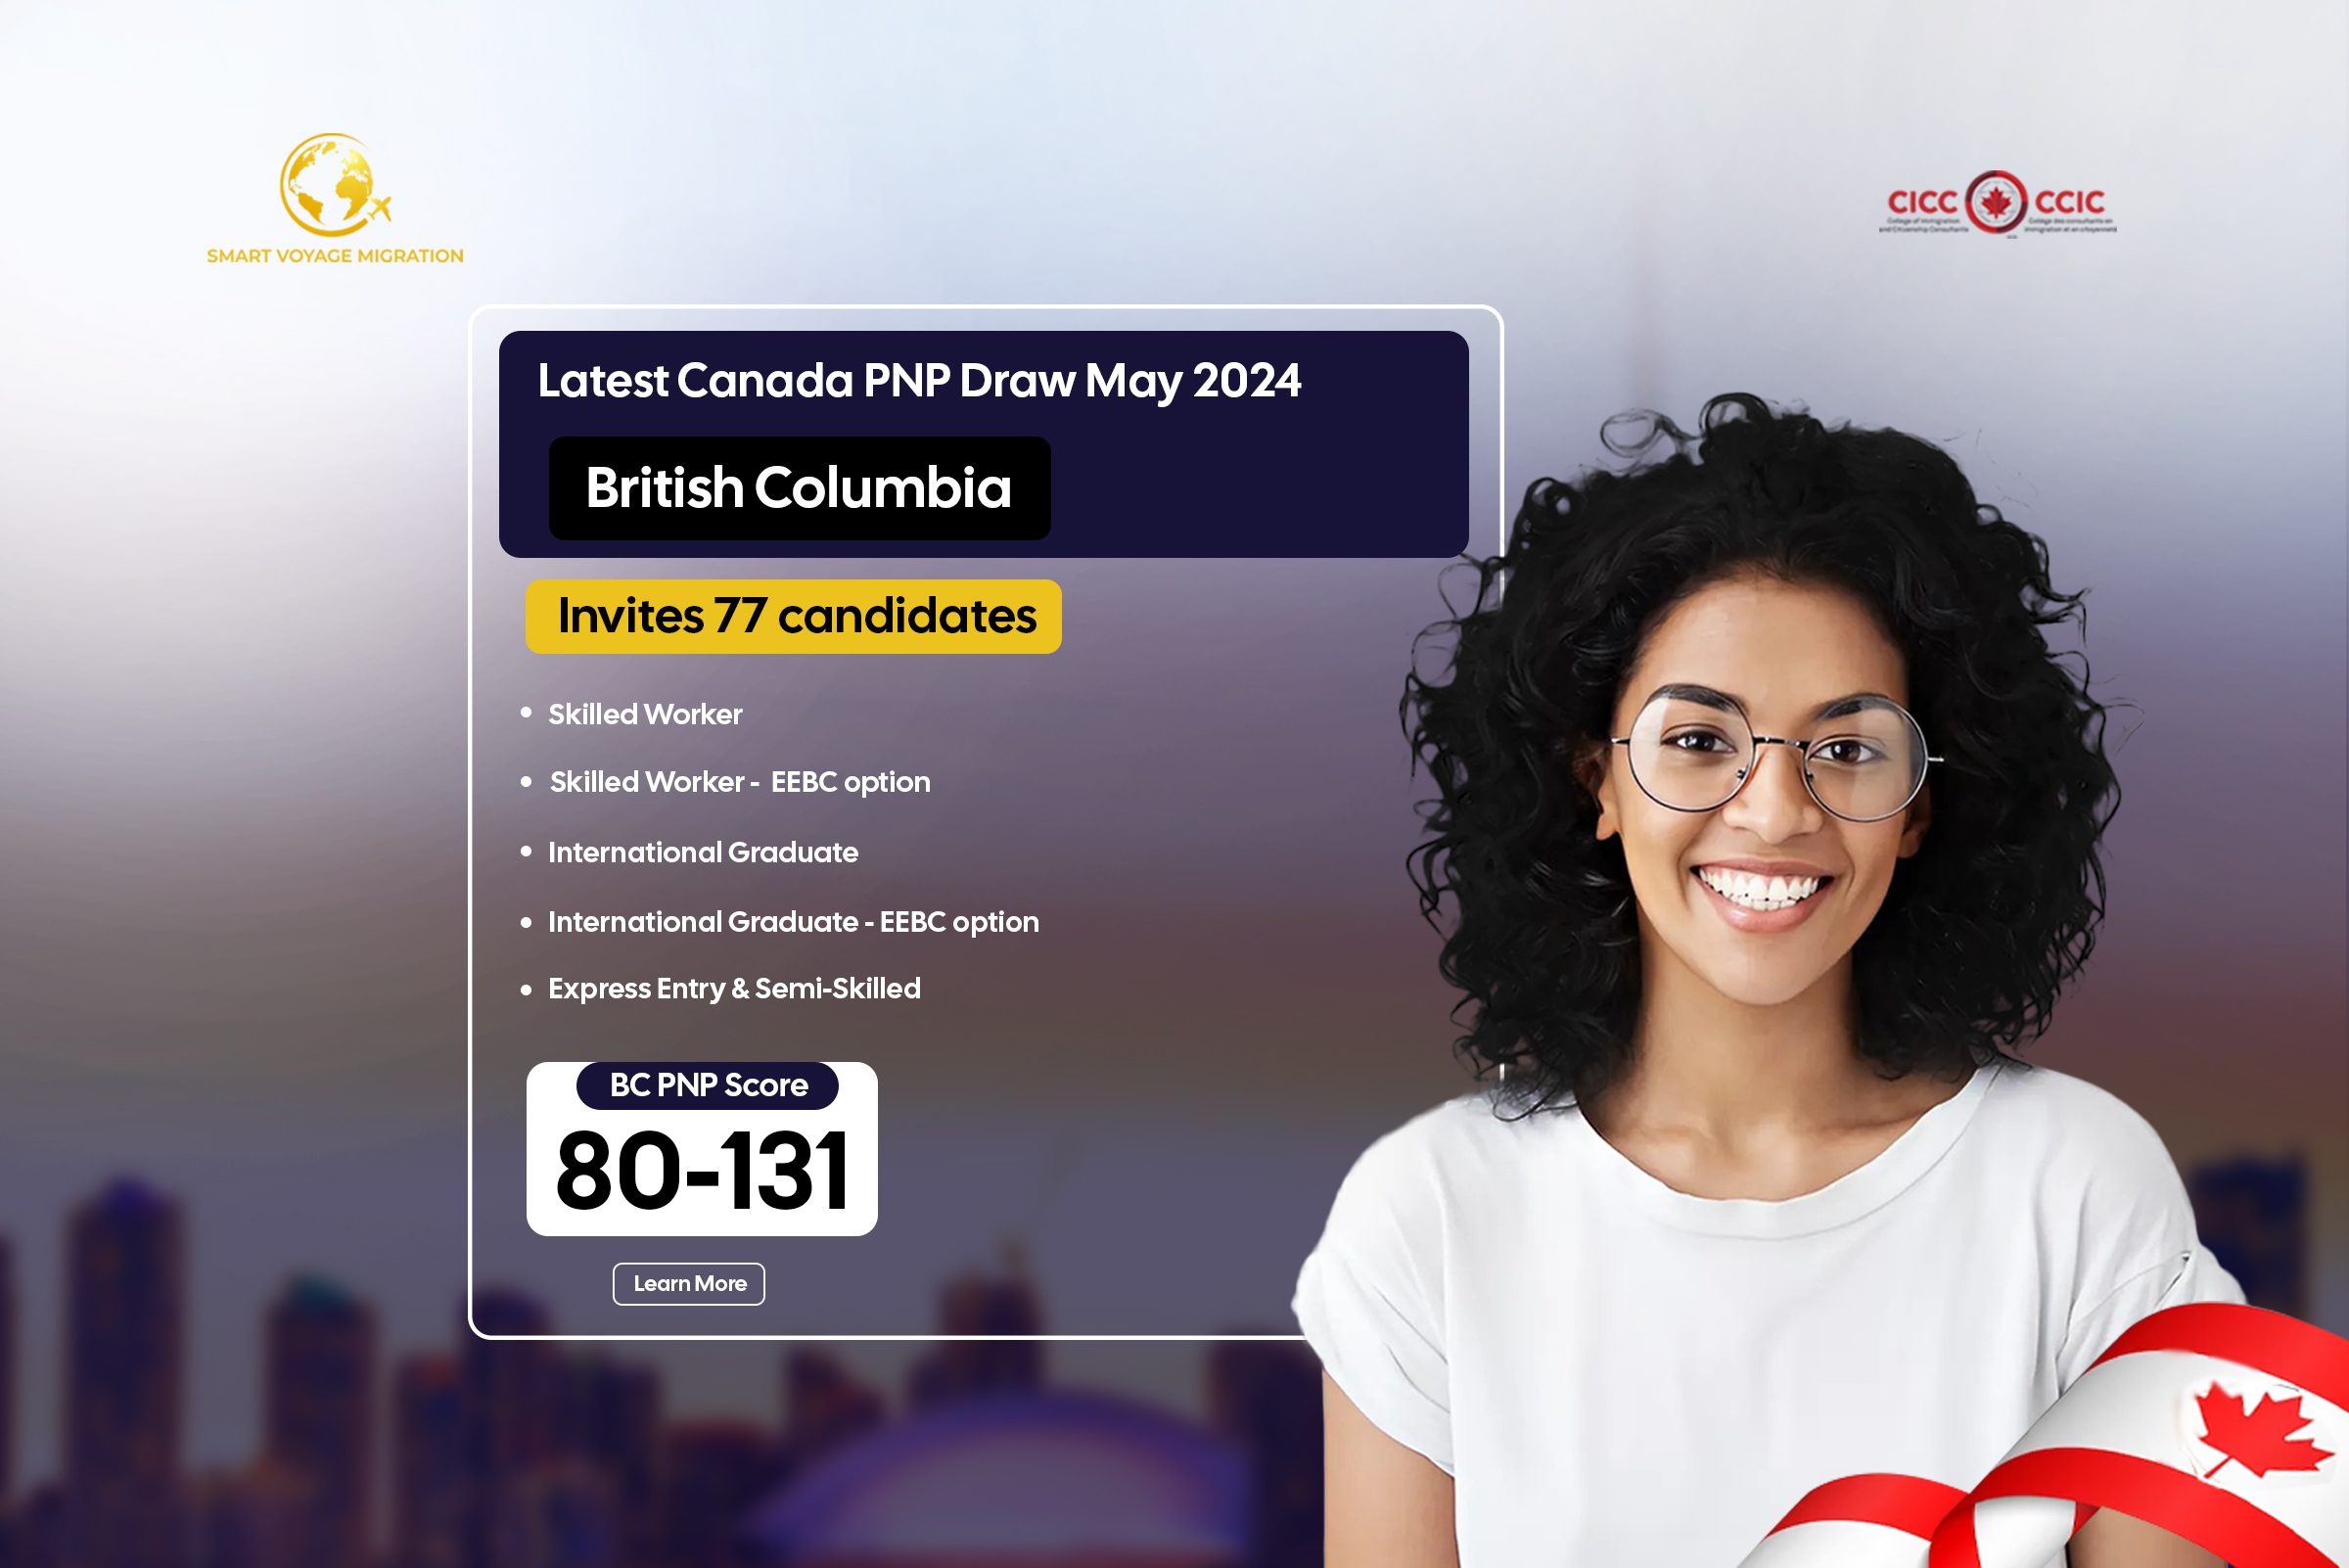 Third Canada PNP Draw of May 2024-British Columbia Issues Provincial Immigration Invitations